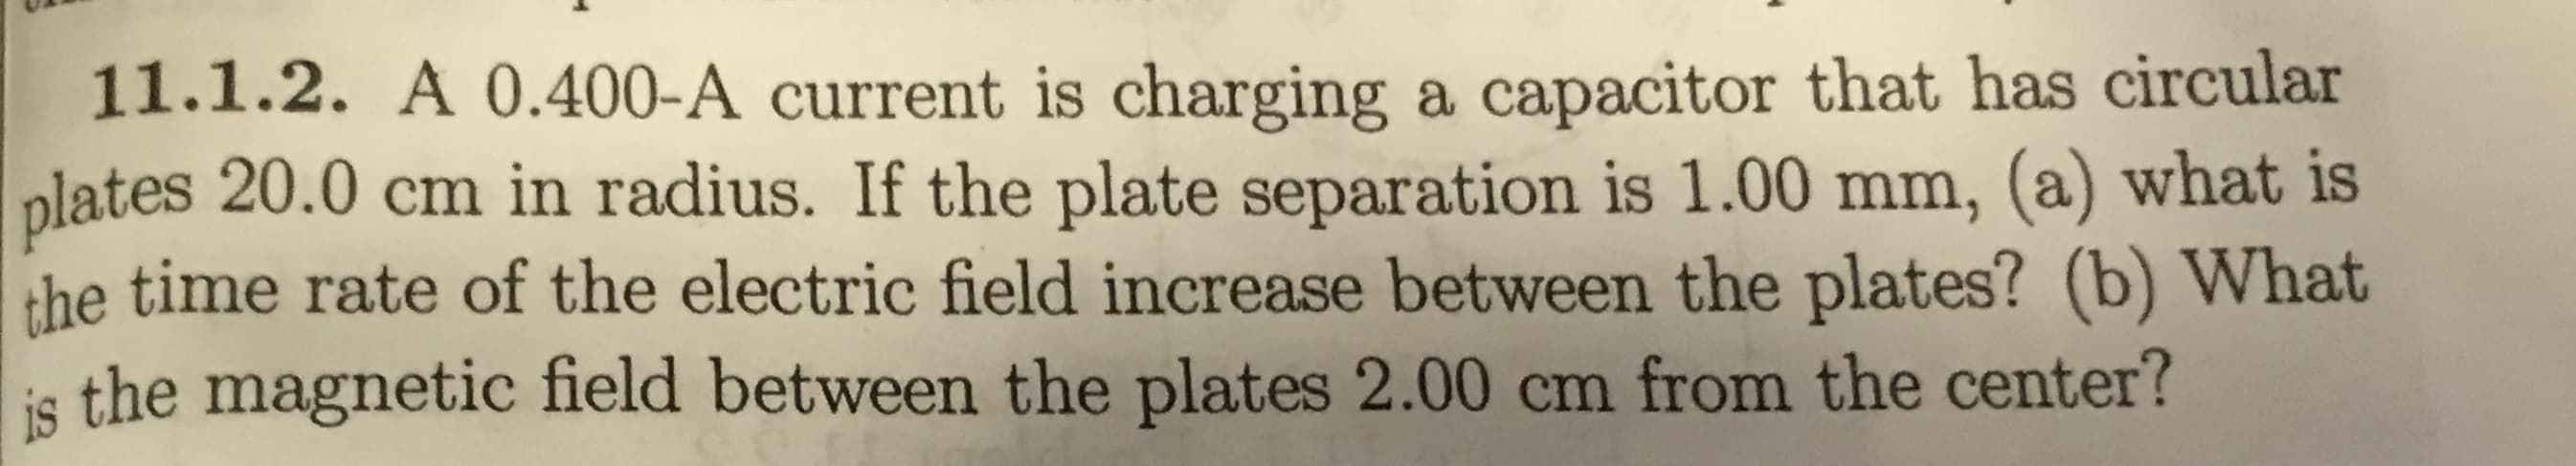 11.1.2. A 0.400-A current is charging a capacitor that has circular
plates 20.0 cm in radius. If the plate separation is 1.00 mm, (a) what is
the time rate of the electric field increase between the plates? (b) What
is the magnetic field between the plates 2.00 cm from the center?
